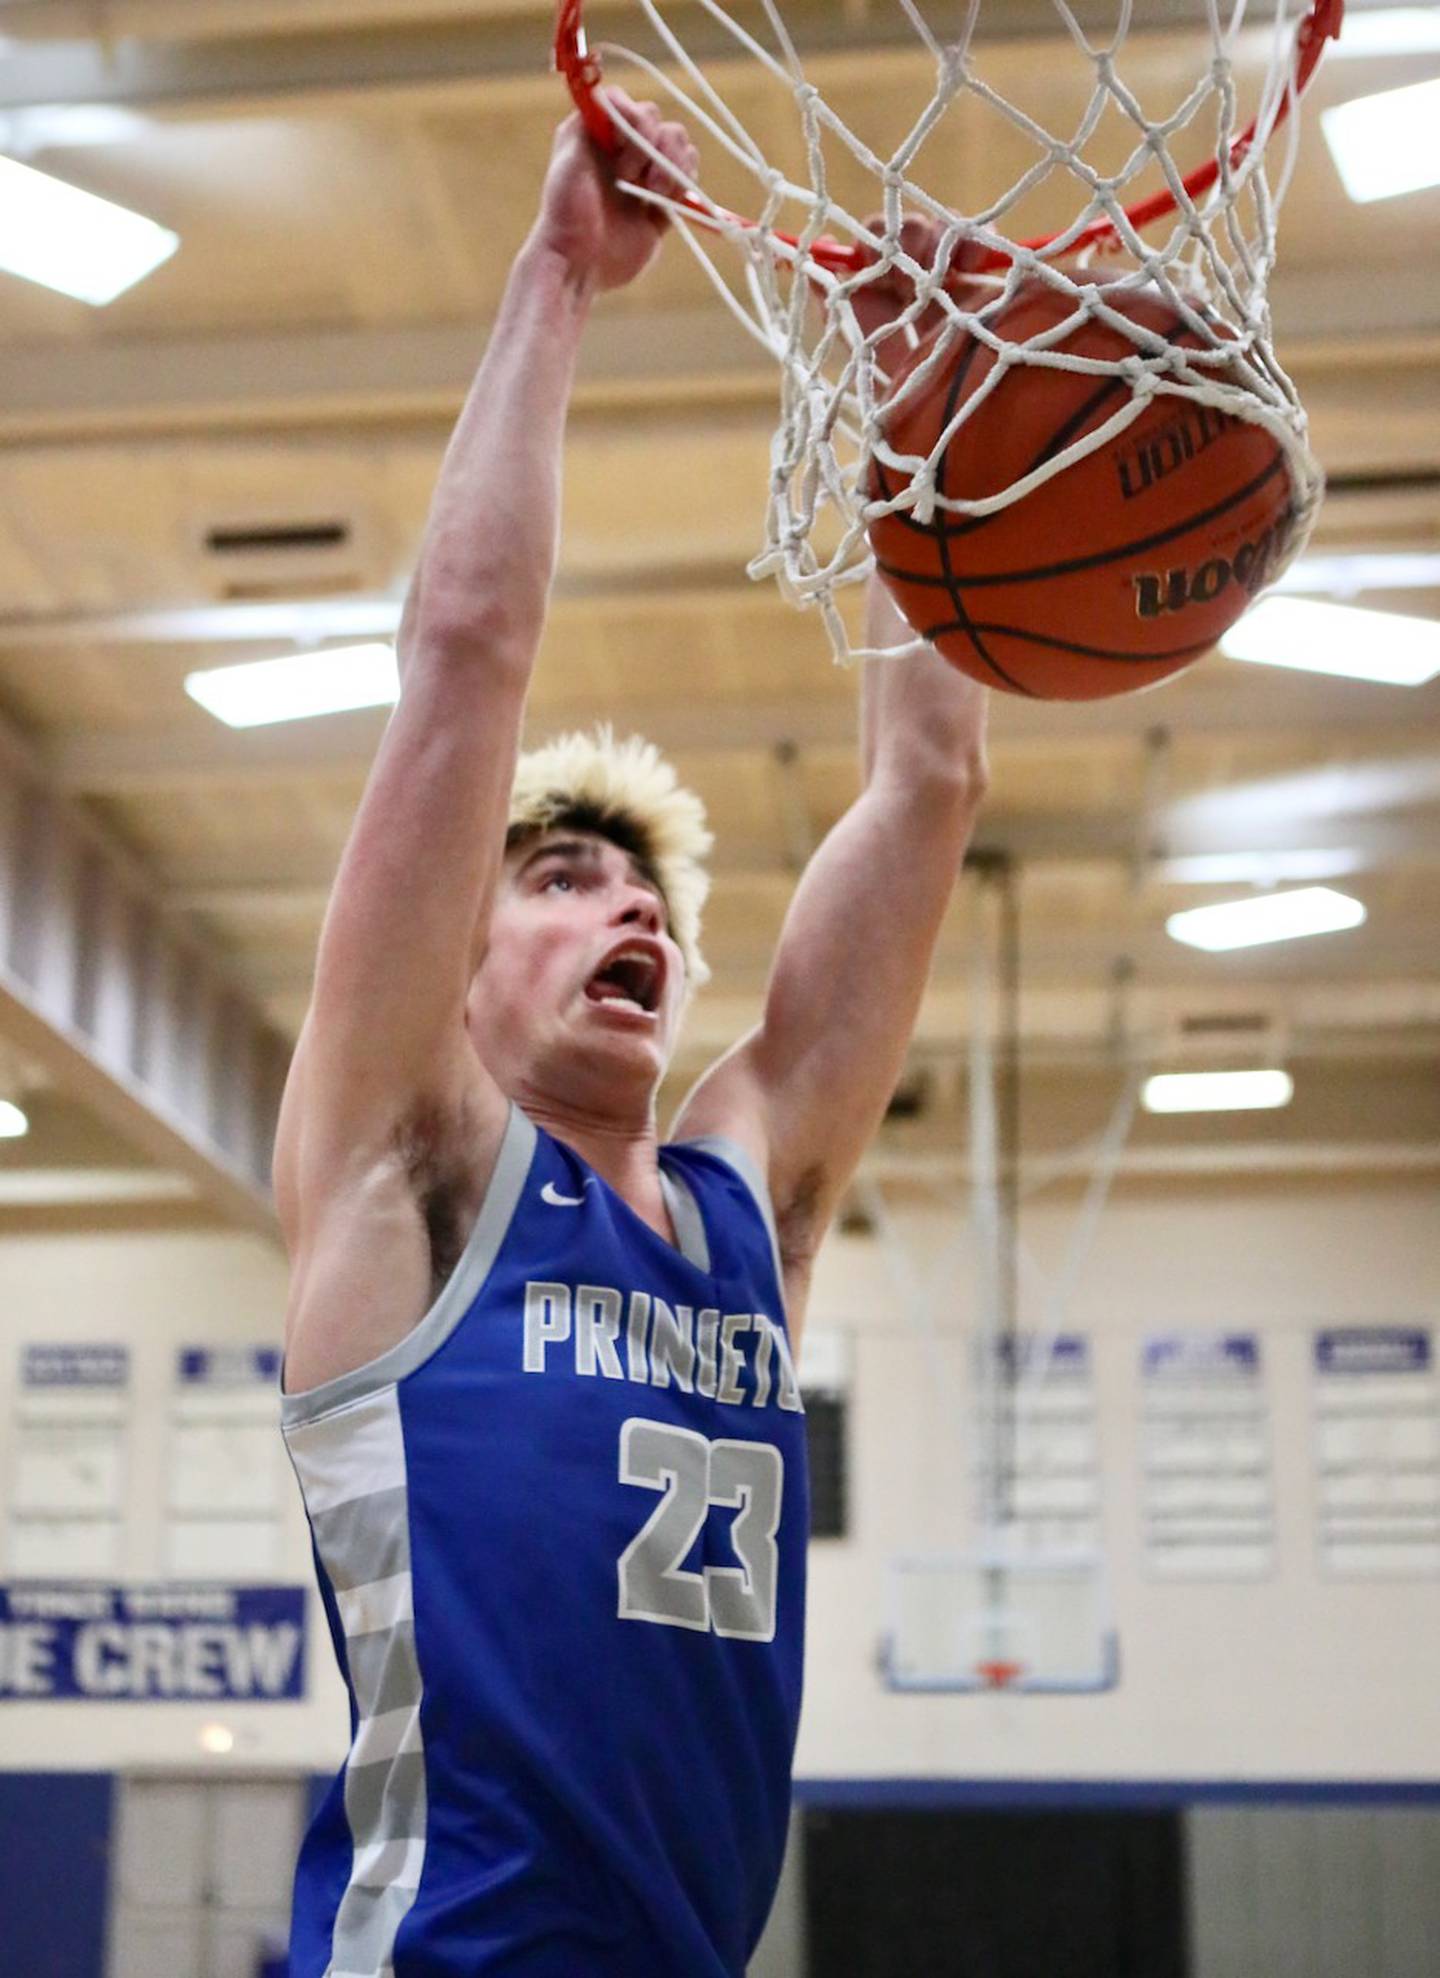 BCR Boys Basketball Player of the Year Noah LaPorte of Princeton demonstrate one of his dunks.